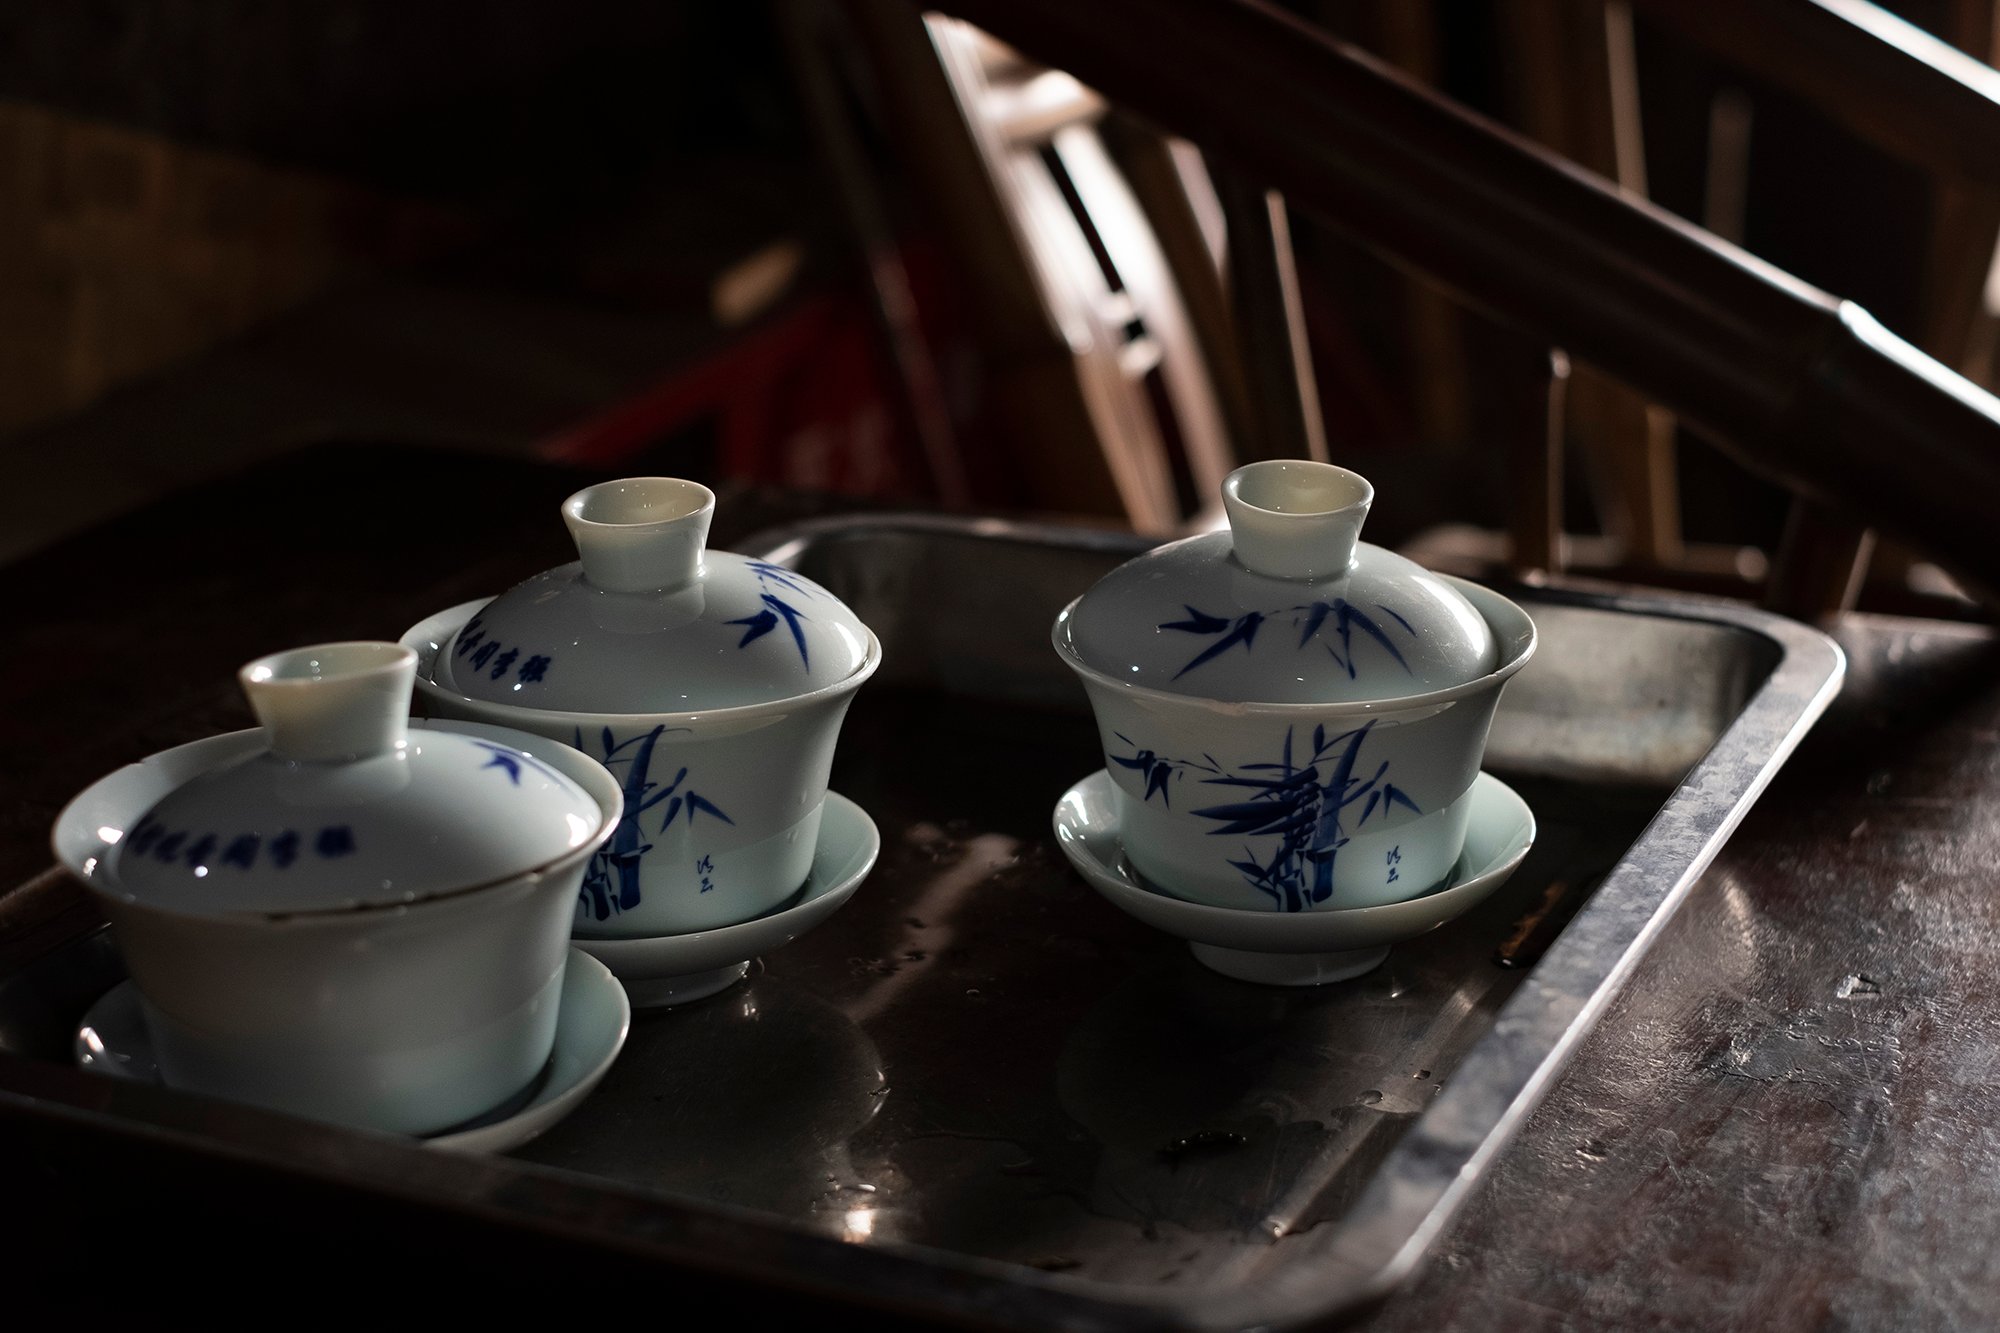 Guanyin Pavilion Tea House: Drinking the Same Jasmine Green for 20 Years